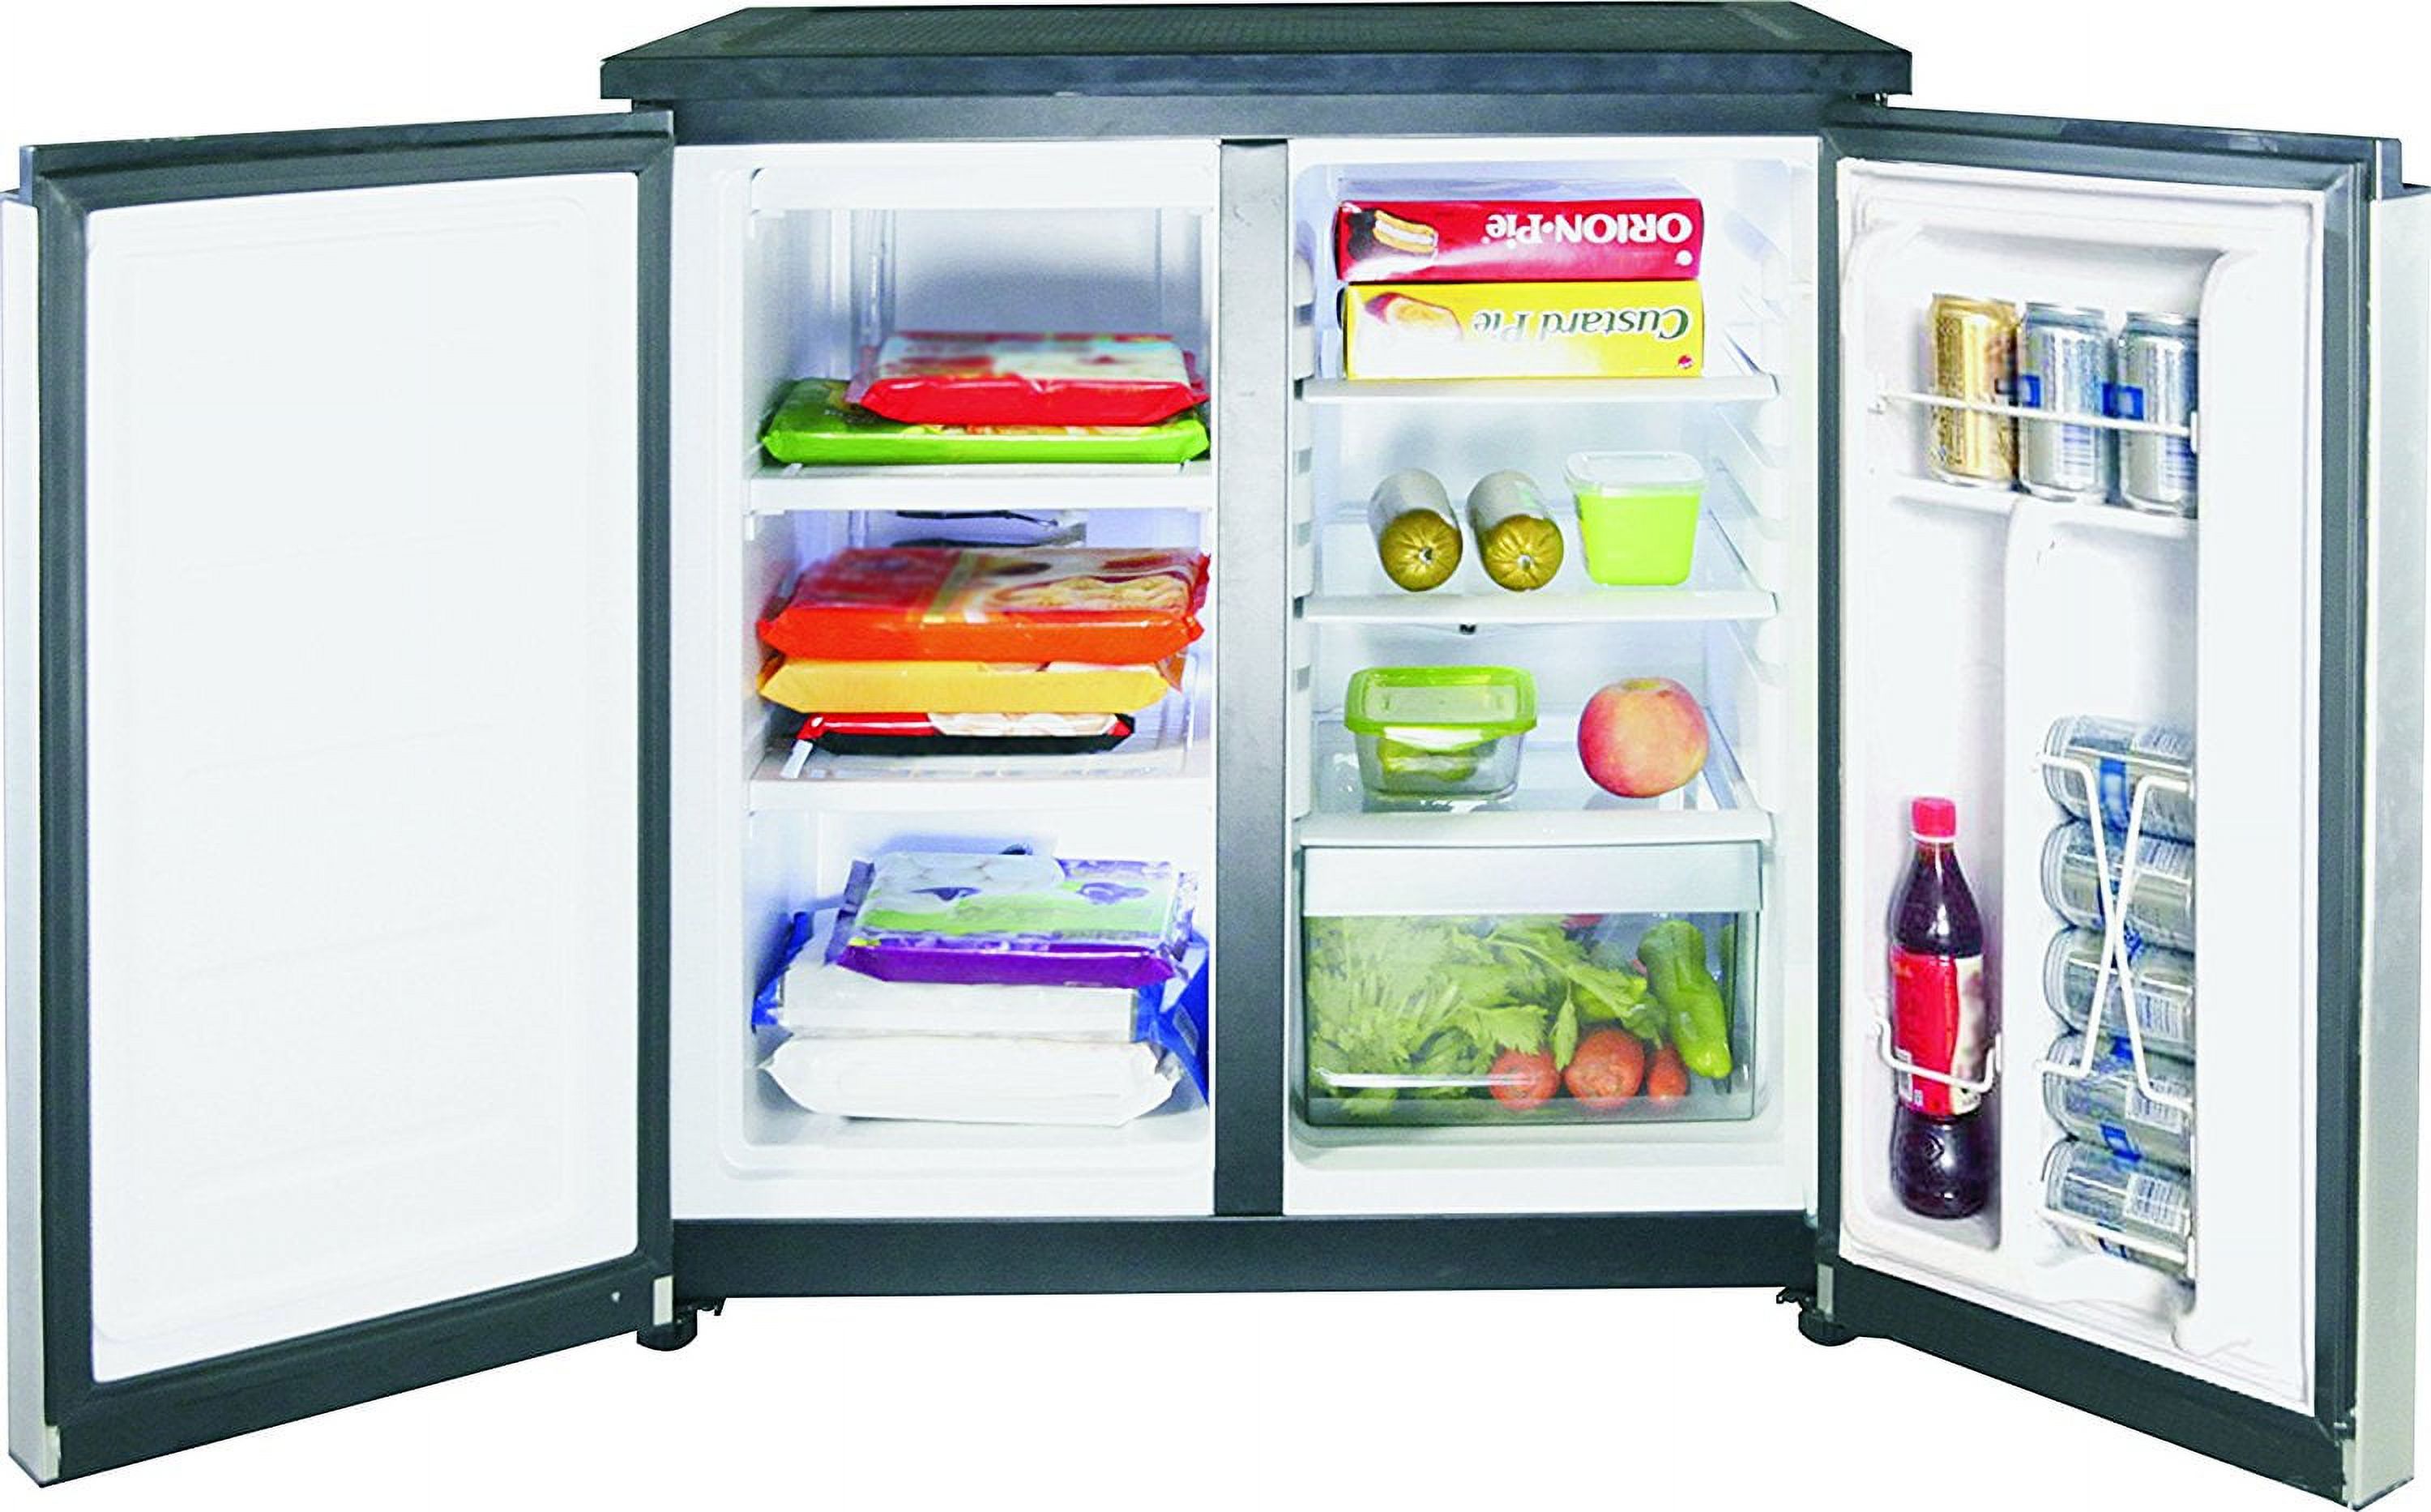 RCA 5.5 Cu. ft. Side by Side 2 Door Refrigerator/Freezer RFR551, Stainless Steel - image 2 of 5